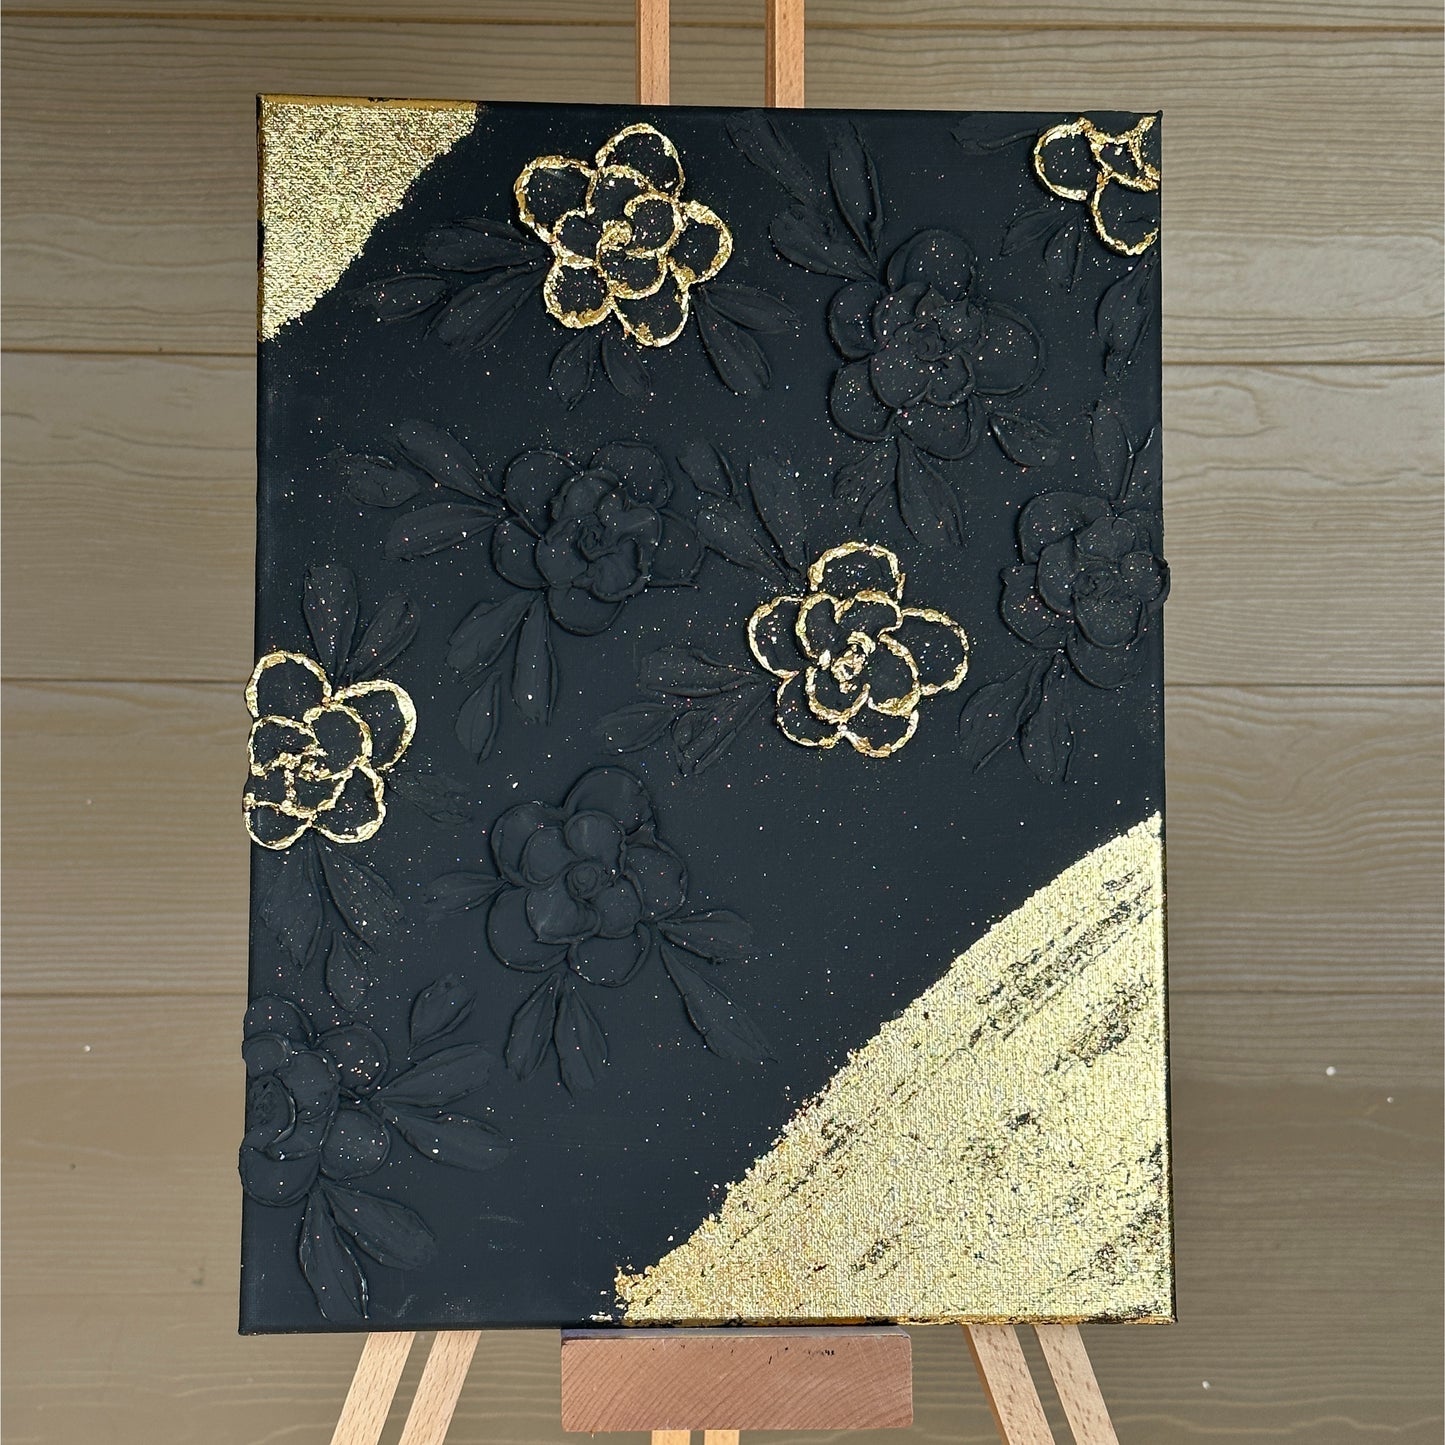 3D Texture Black Roses with Gold Foil on Black 12"x16"